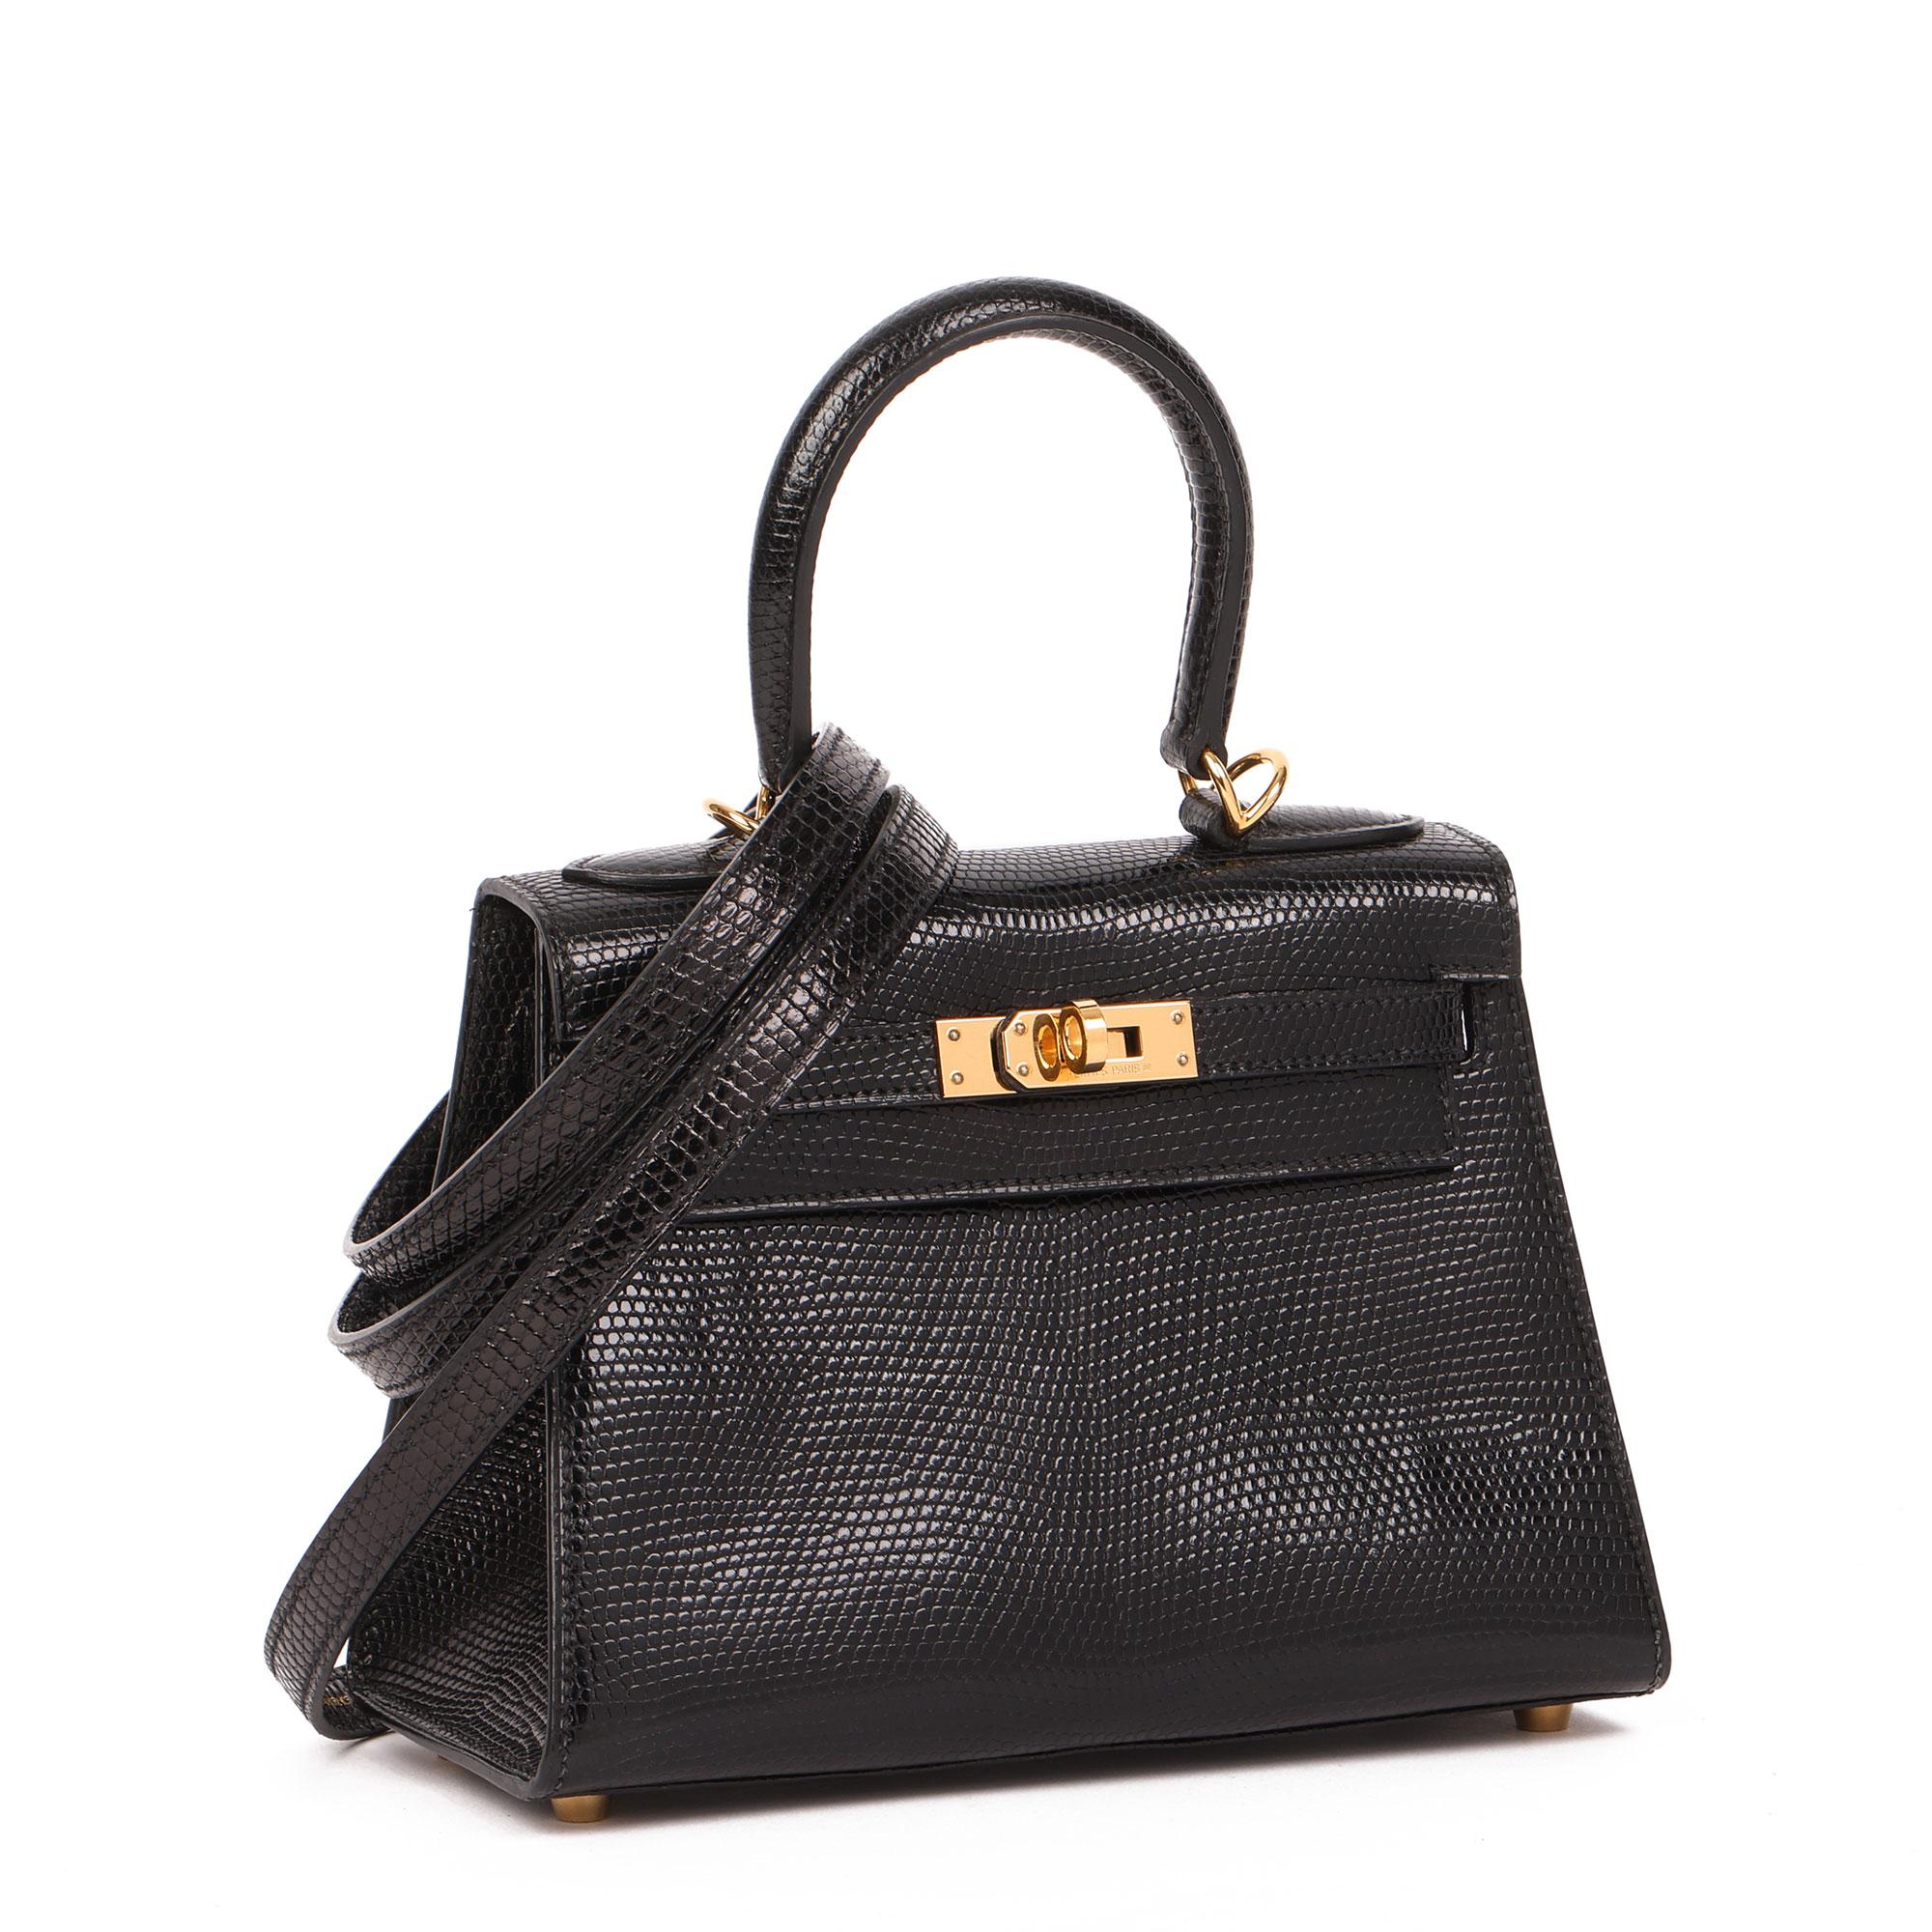 Hermès BLACK LIZARD LEATHER VINTAGE KELLY 20CM SELLIER

CONDITION NOTES
The exterior is in excellent condition with light signs of use.
The interior is in excellent condition with light signs of use.
The hardware is in excellent condition with light